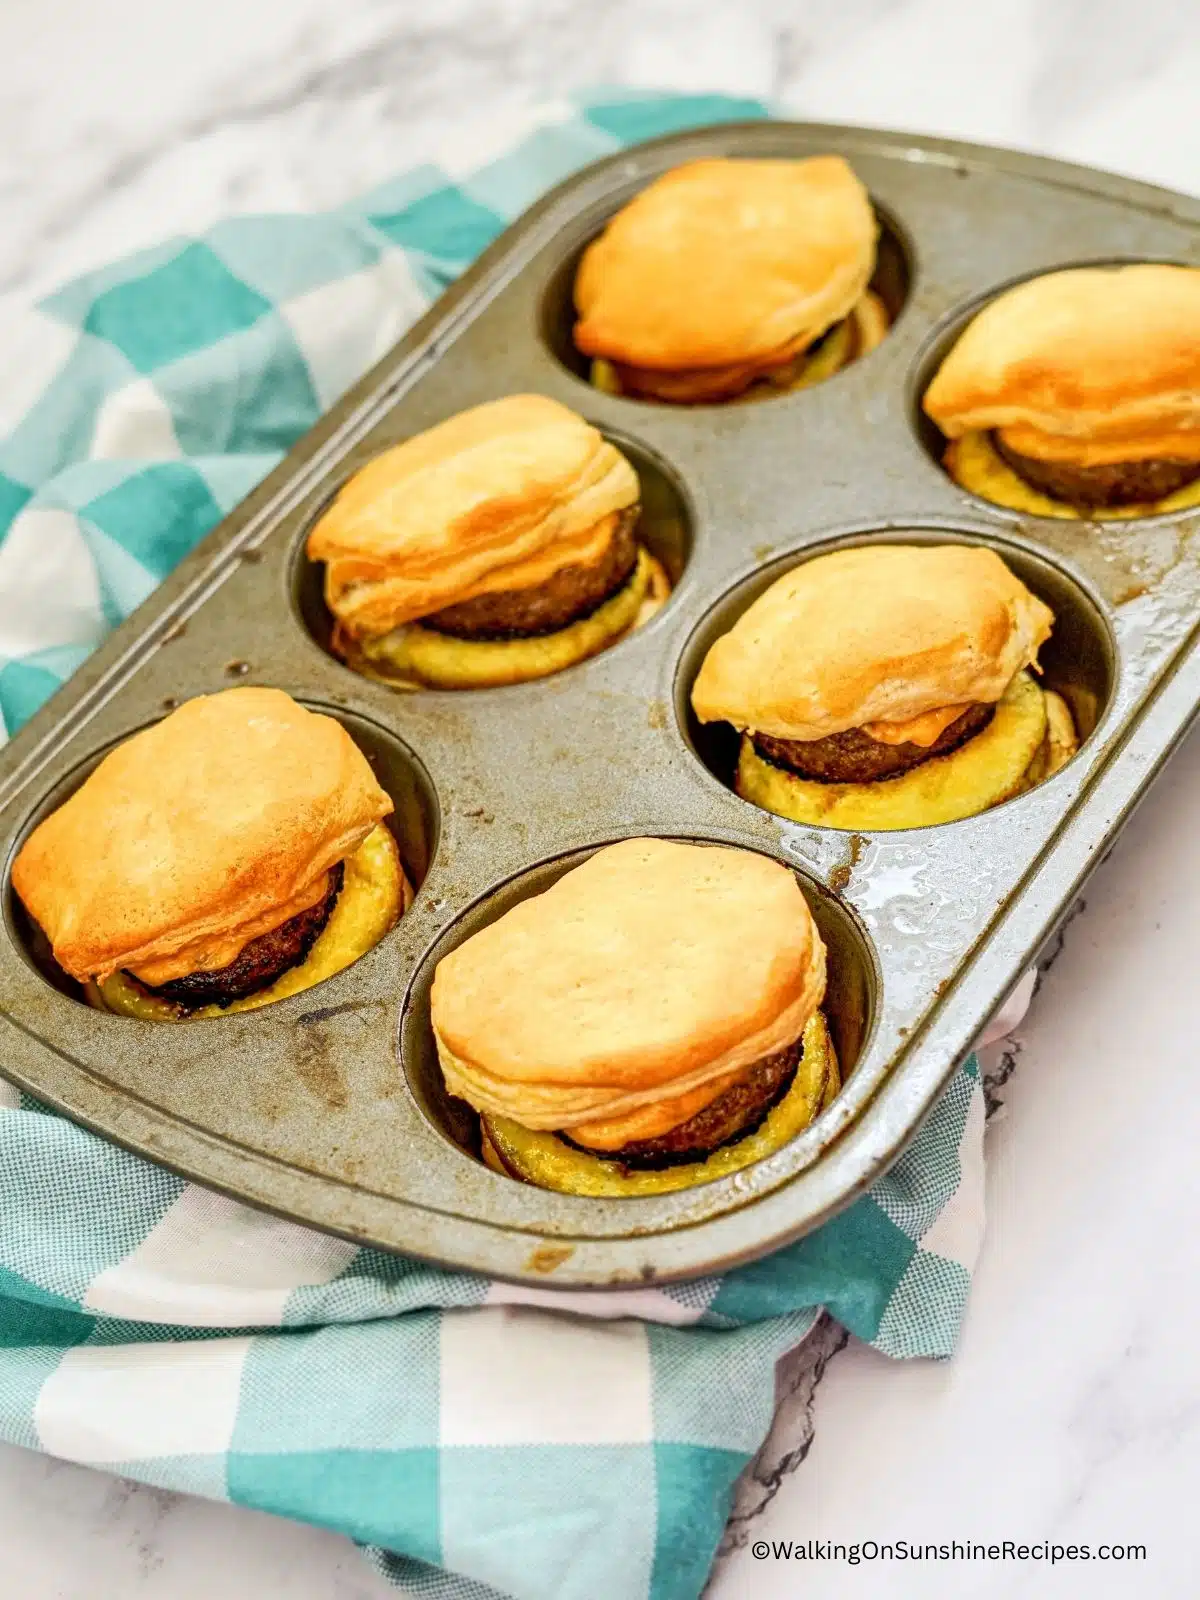 Baked biscuits with eggs, sausage and cheese in muffin pan.